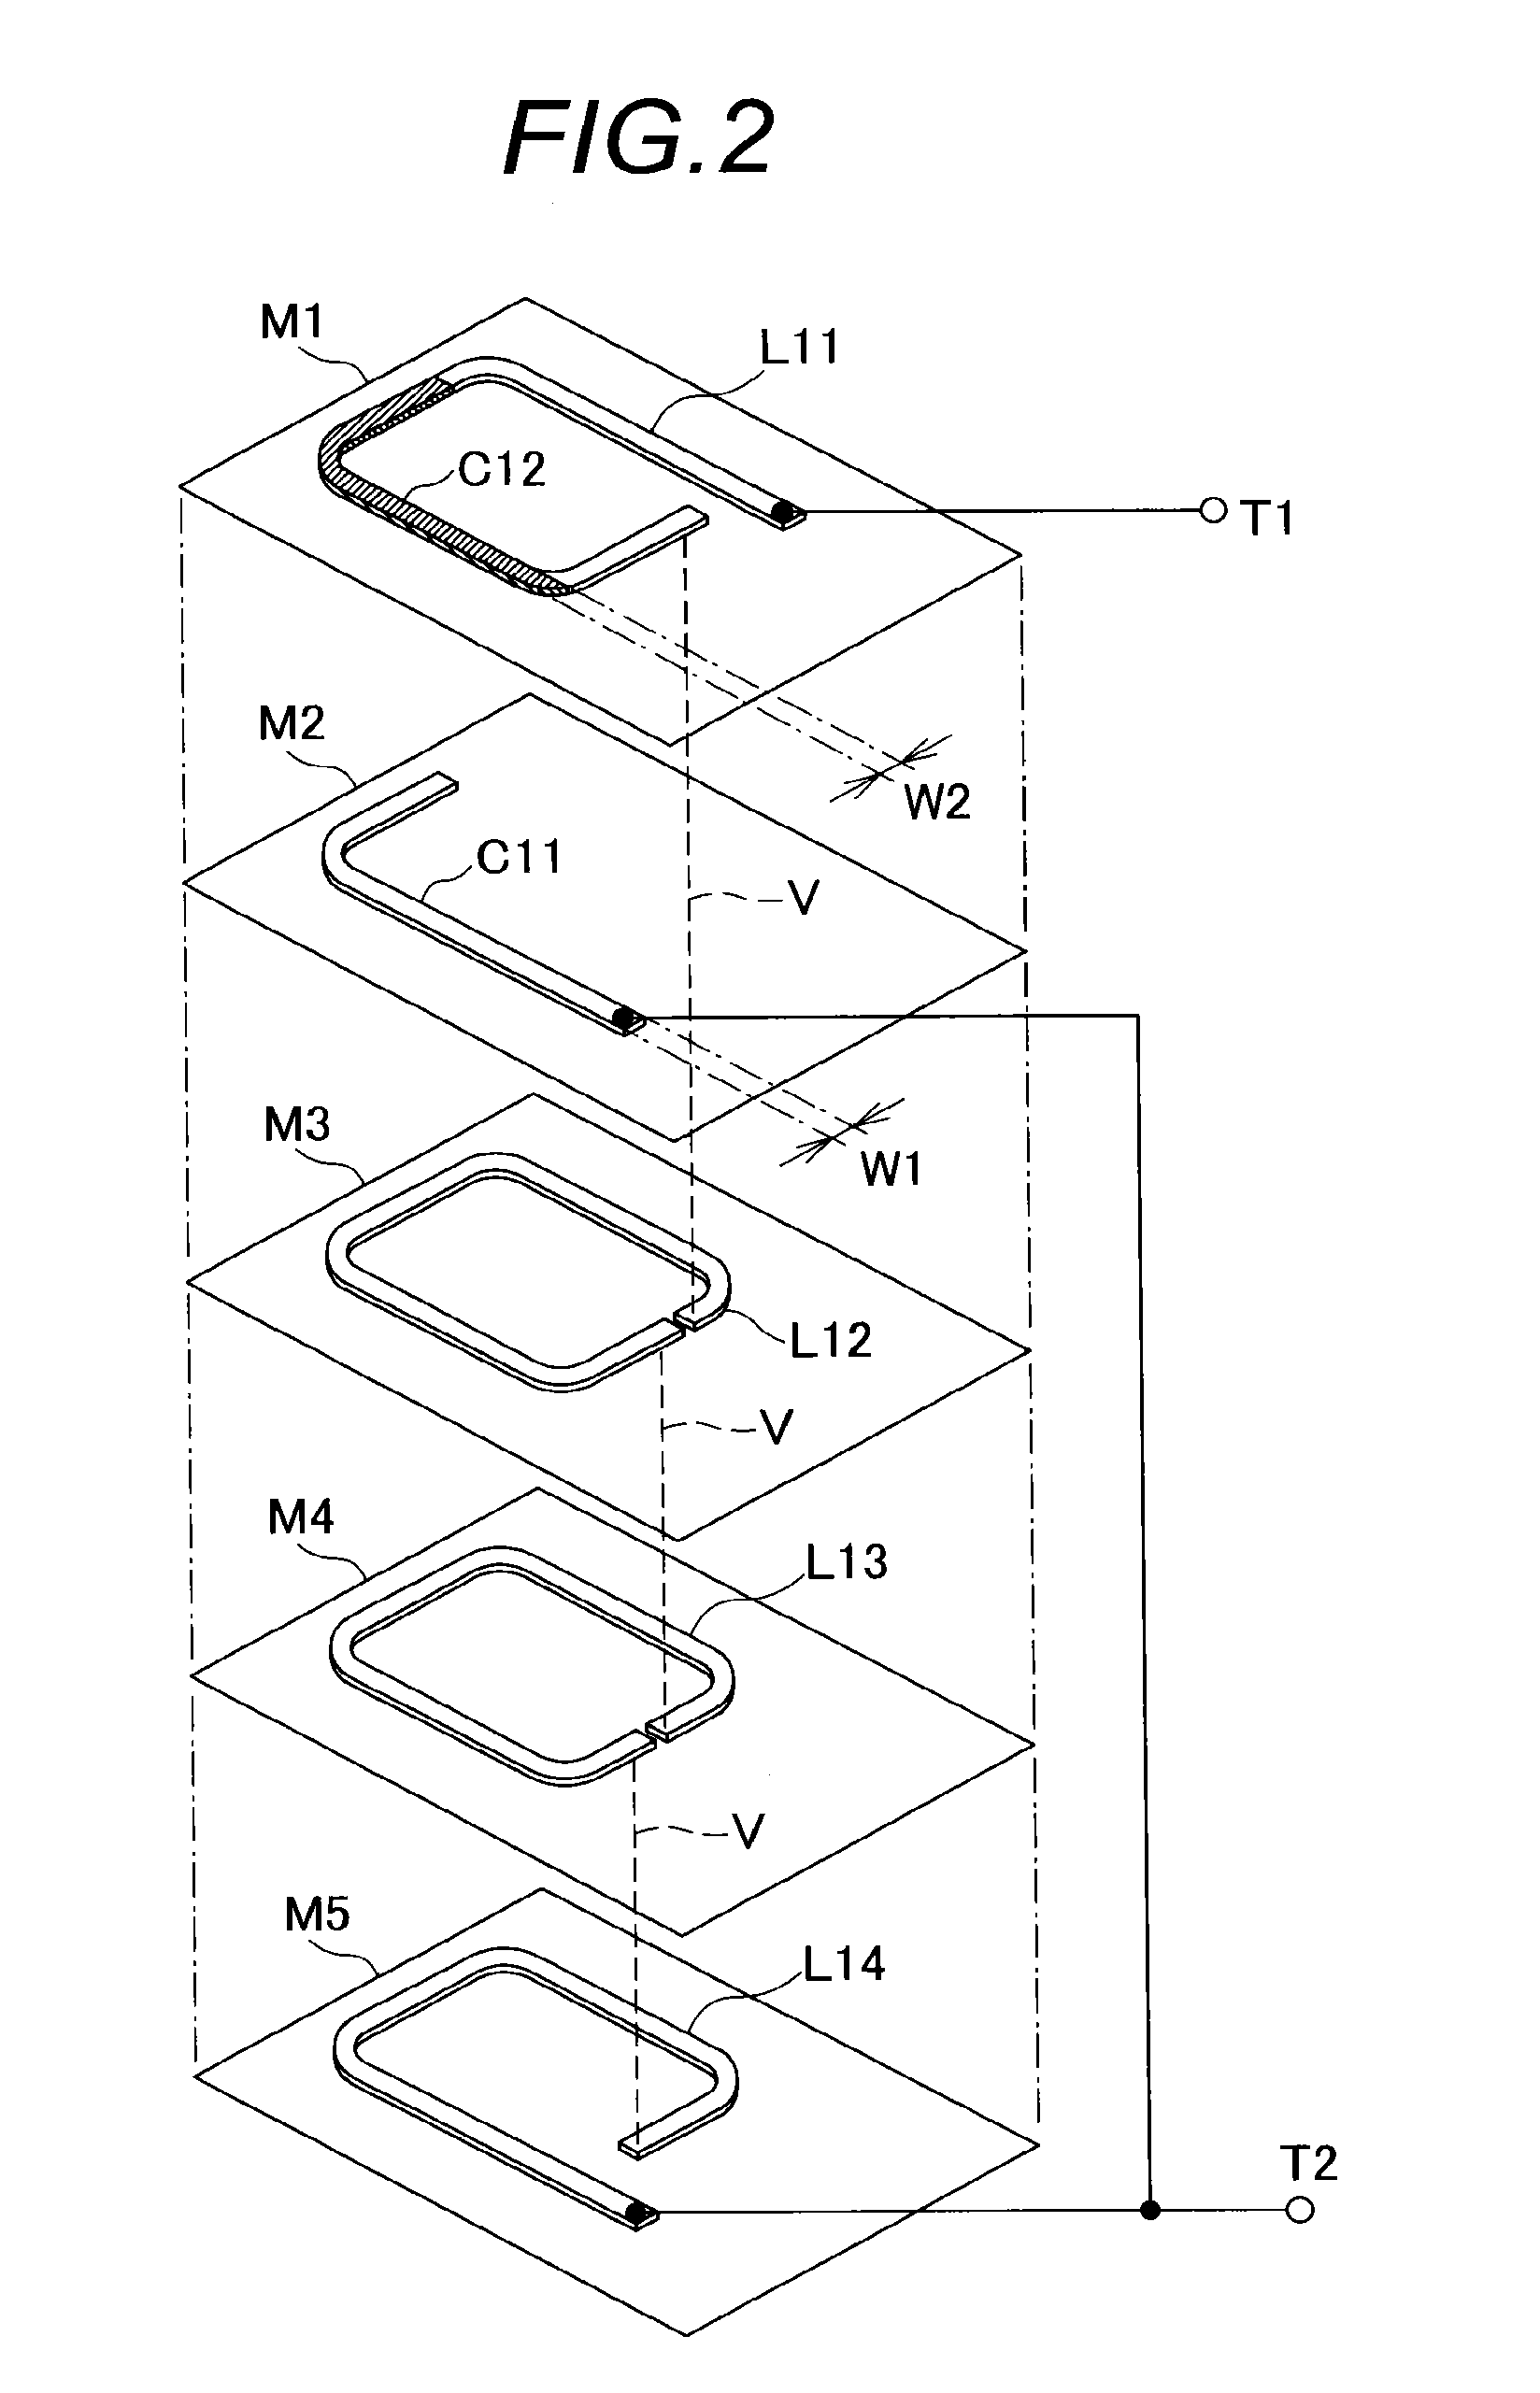 Laminated composite electronic device including coil and capacitor